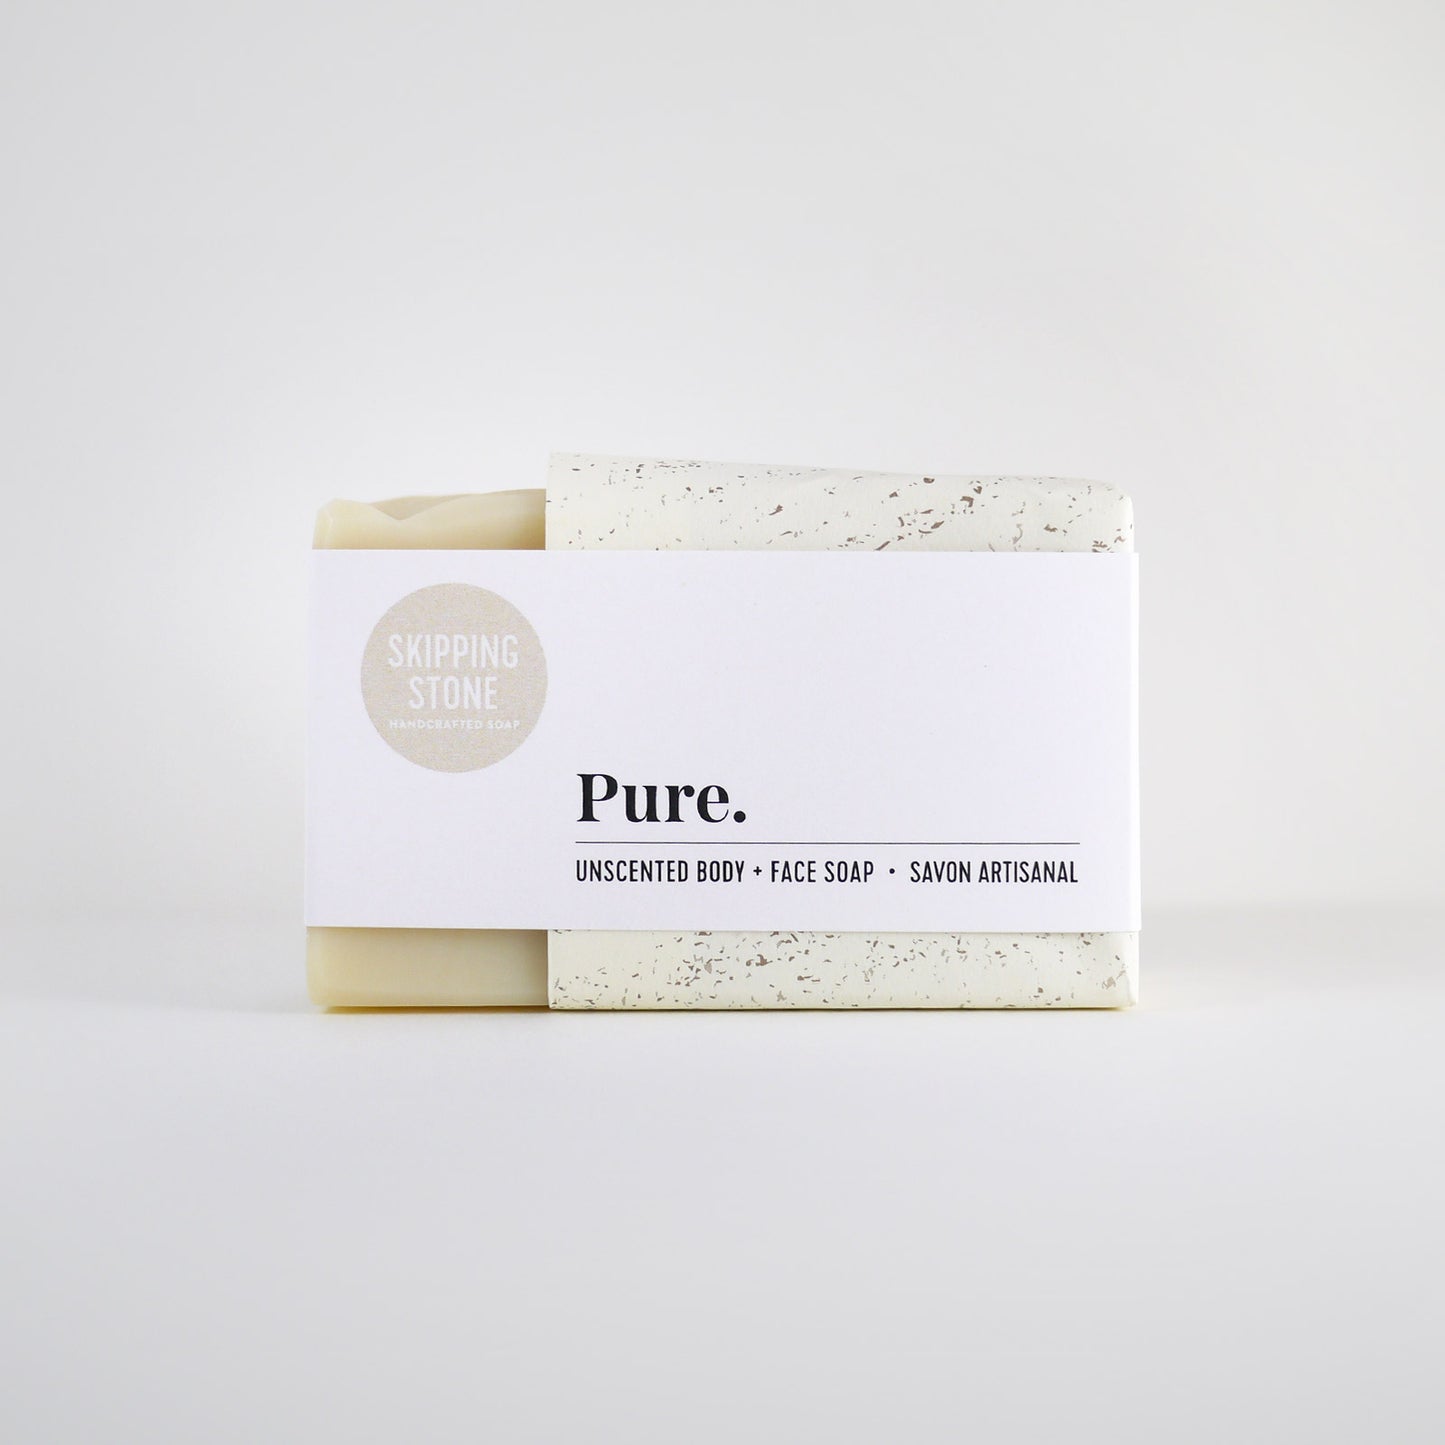 Pure. Body + Face Soap – unscented